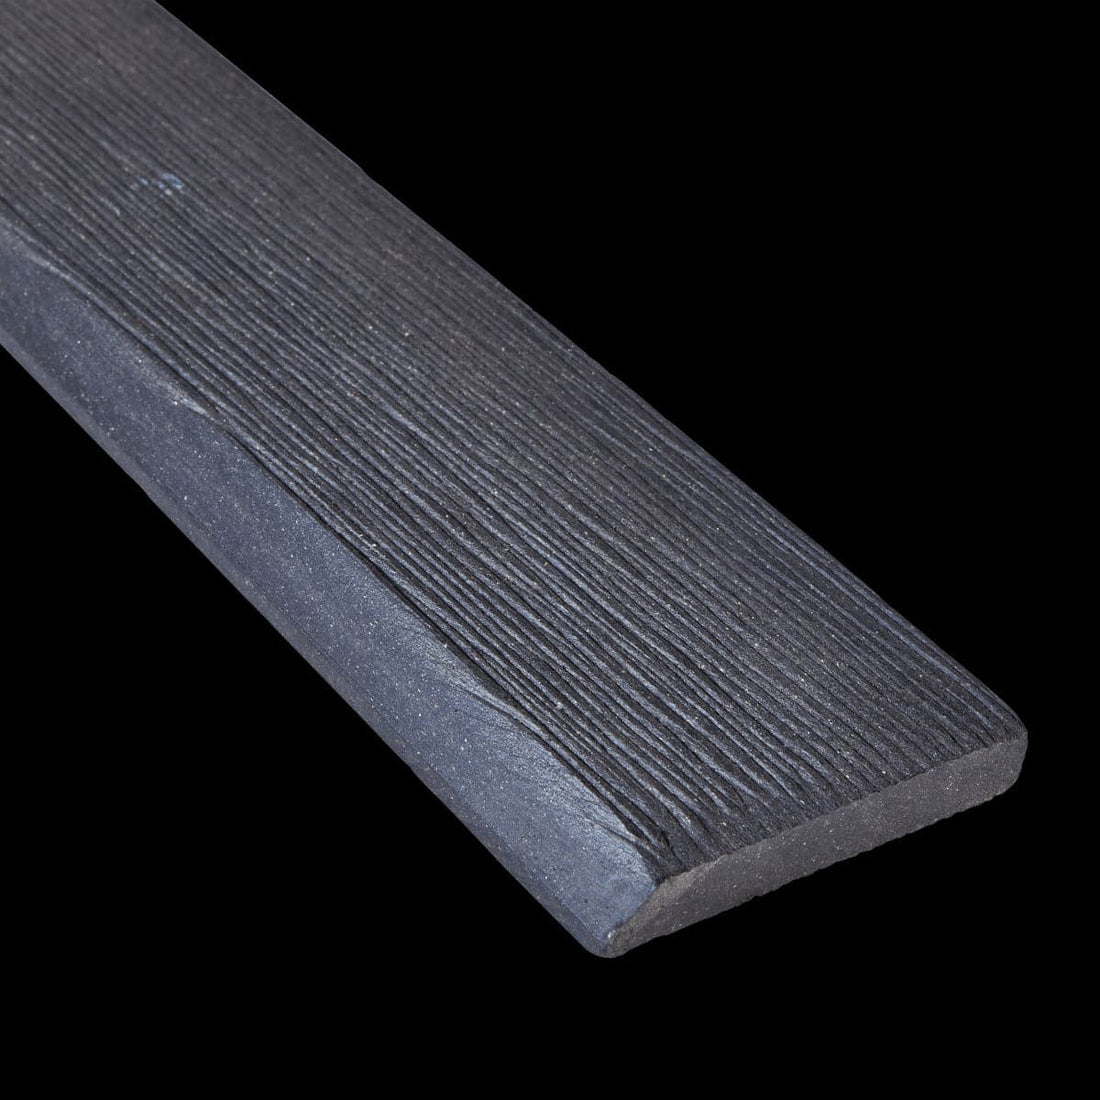 GREY END STRIP FOR KYOTO NATERIAL COMPOSITE PLANK 240X5.5 THICKNESS 1.5 - best price from Maltashopper.com BR500012722